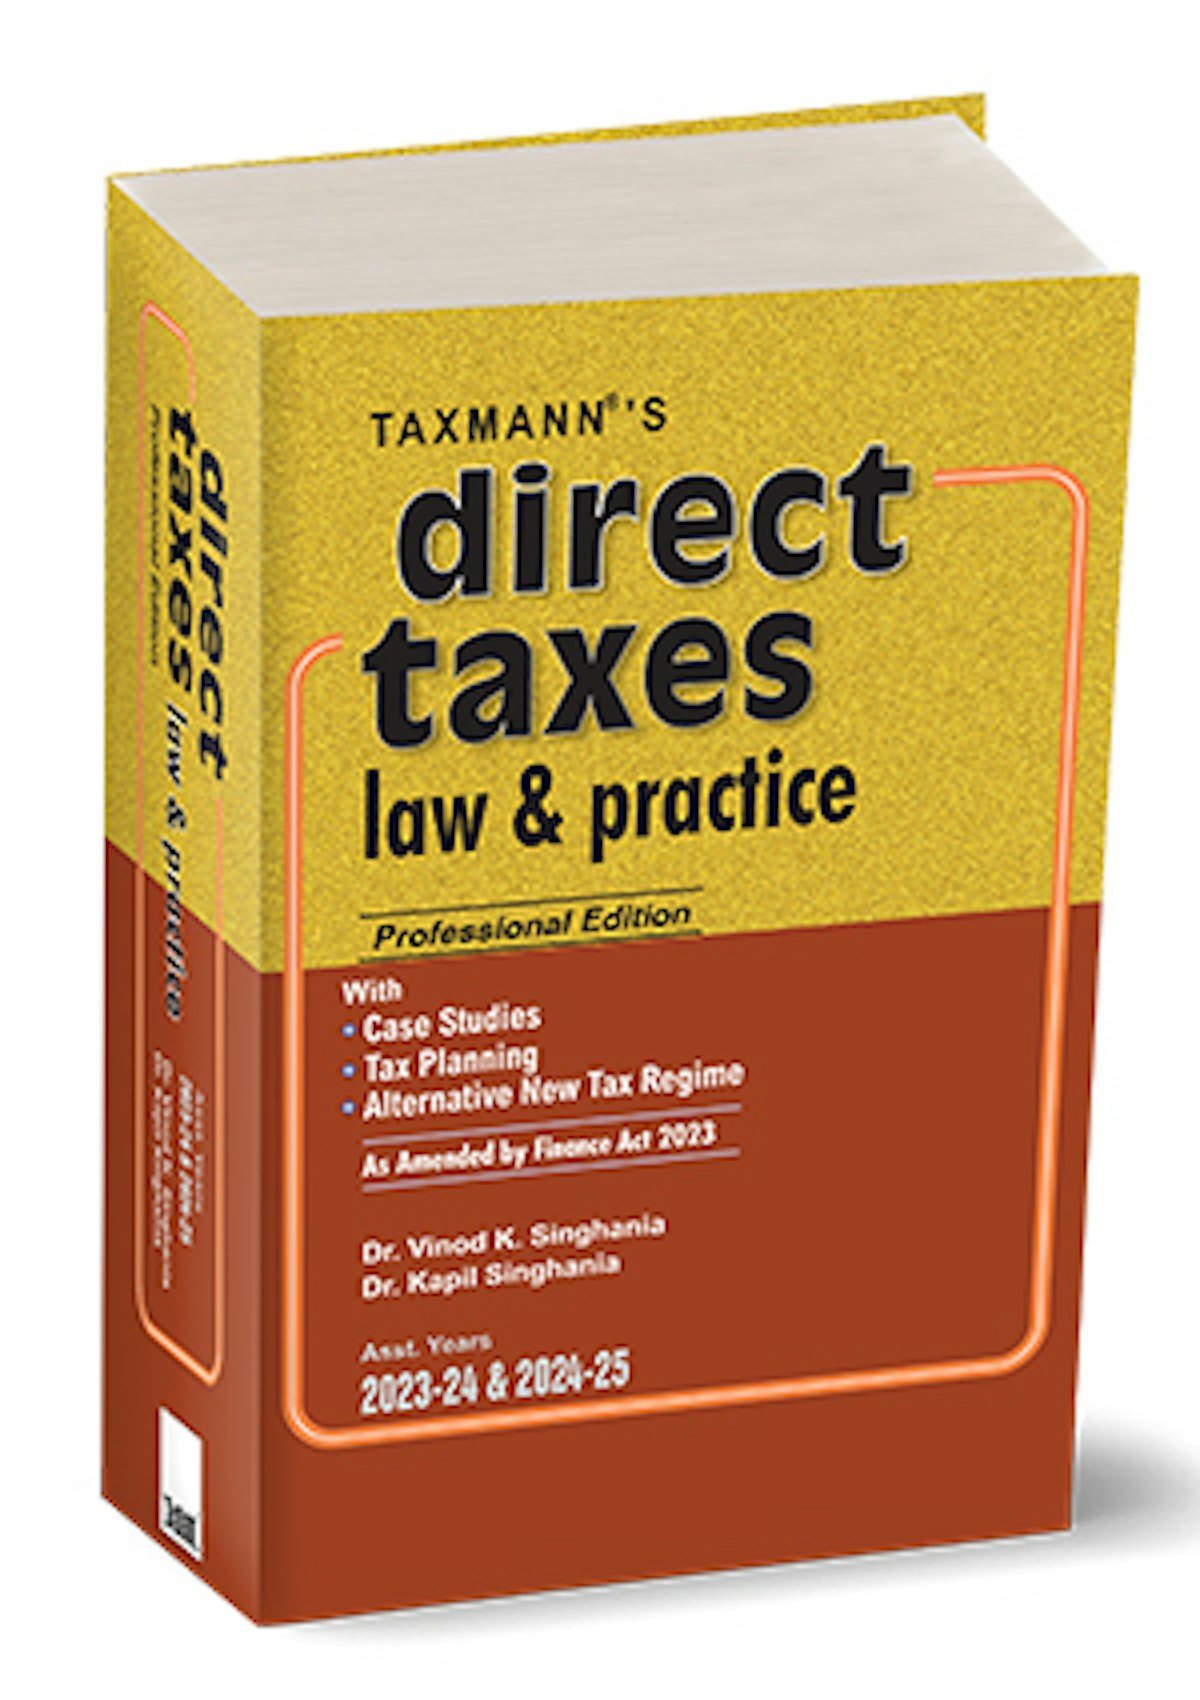 Direct Taxes Law and Practice (DTLP) for AYs 202324 & 202425 by Vinod